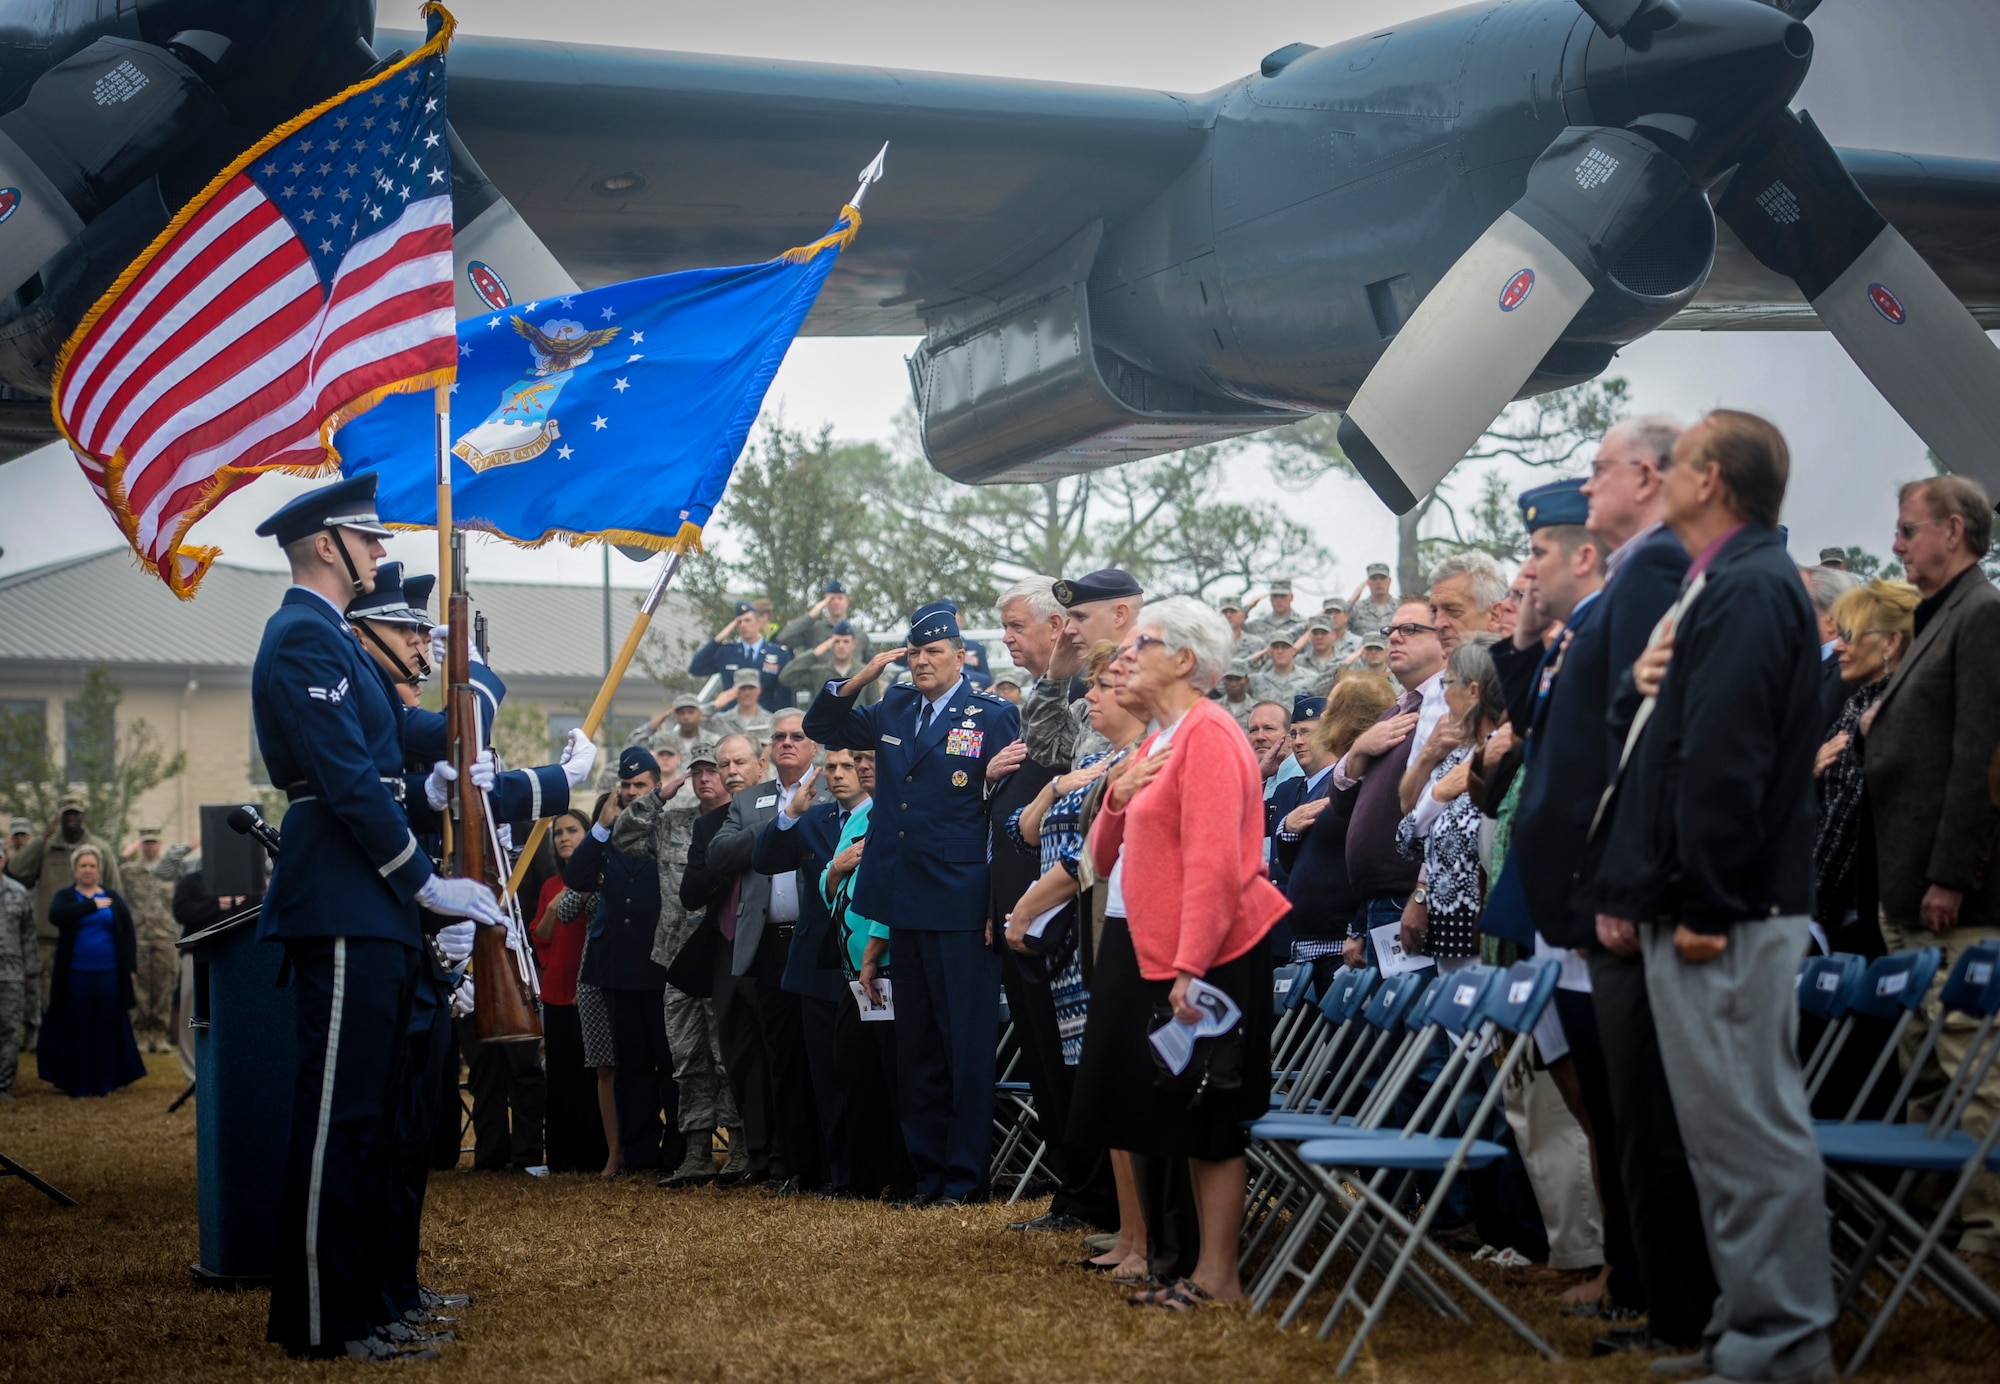 Hurlburt Field Base Honor Guard members present the colors before the AC-130H Spectre dedication ceremony at Hurlburt Field, Fla., Feb. 2, 2016. The Spectre played a role in operations all over the world, first in Vietnam, proceeding into the latter of the 20th century with operations Eagle Claw, Urgent Fury, Just Cause and Desert Storm. The last operational years of the AC-130H Spectre were spent flying combat missions in the Balkans and Somalia, and in Afghanistan in support of Operation Enduring Freedom. (U.S. Air Force photo by Senior Airman Meagan Schutter)